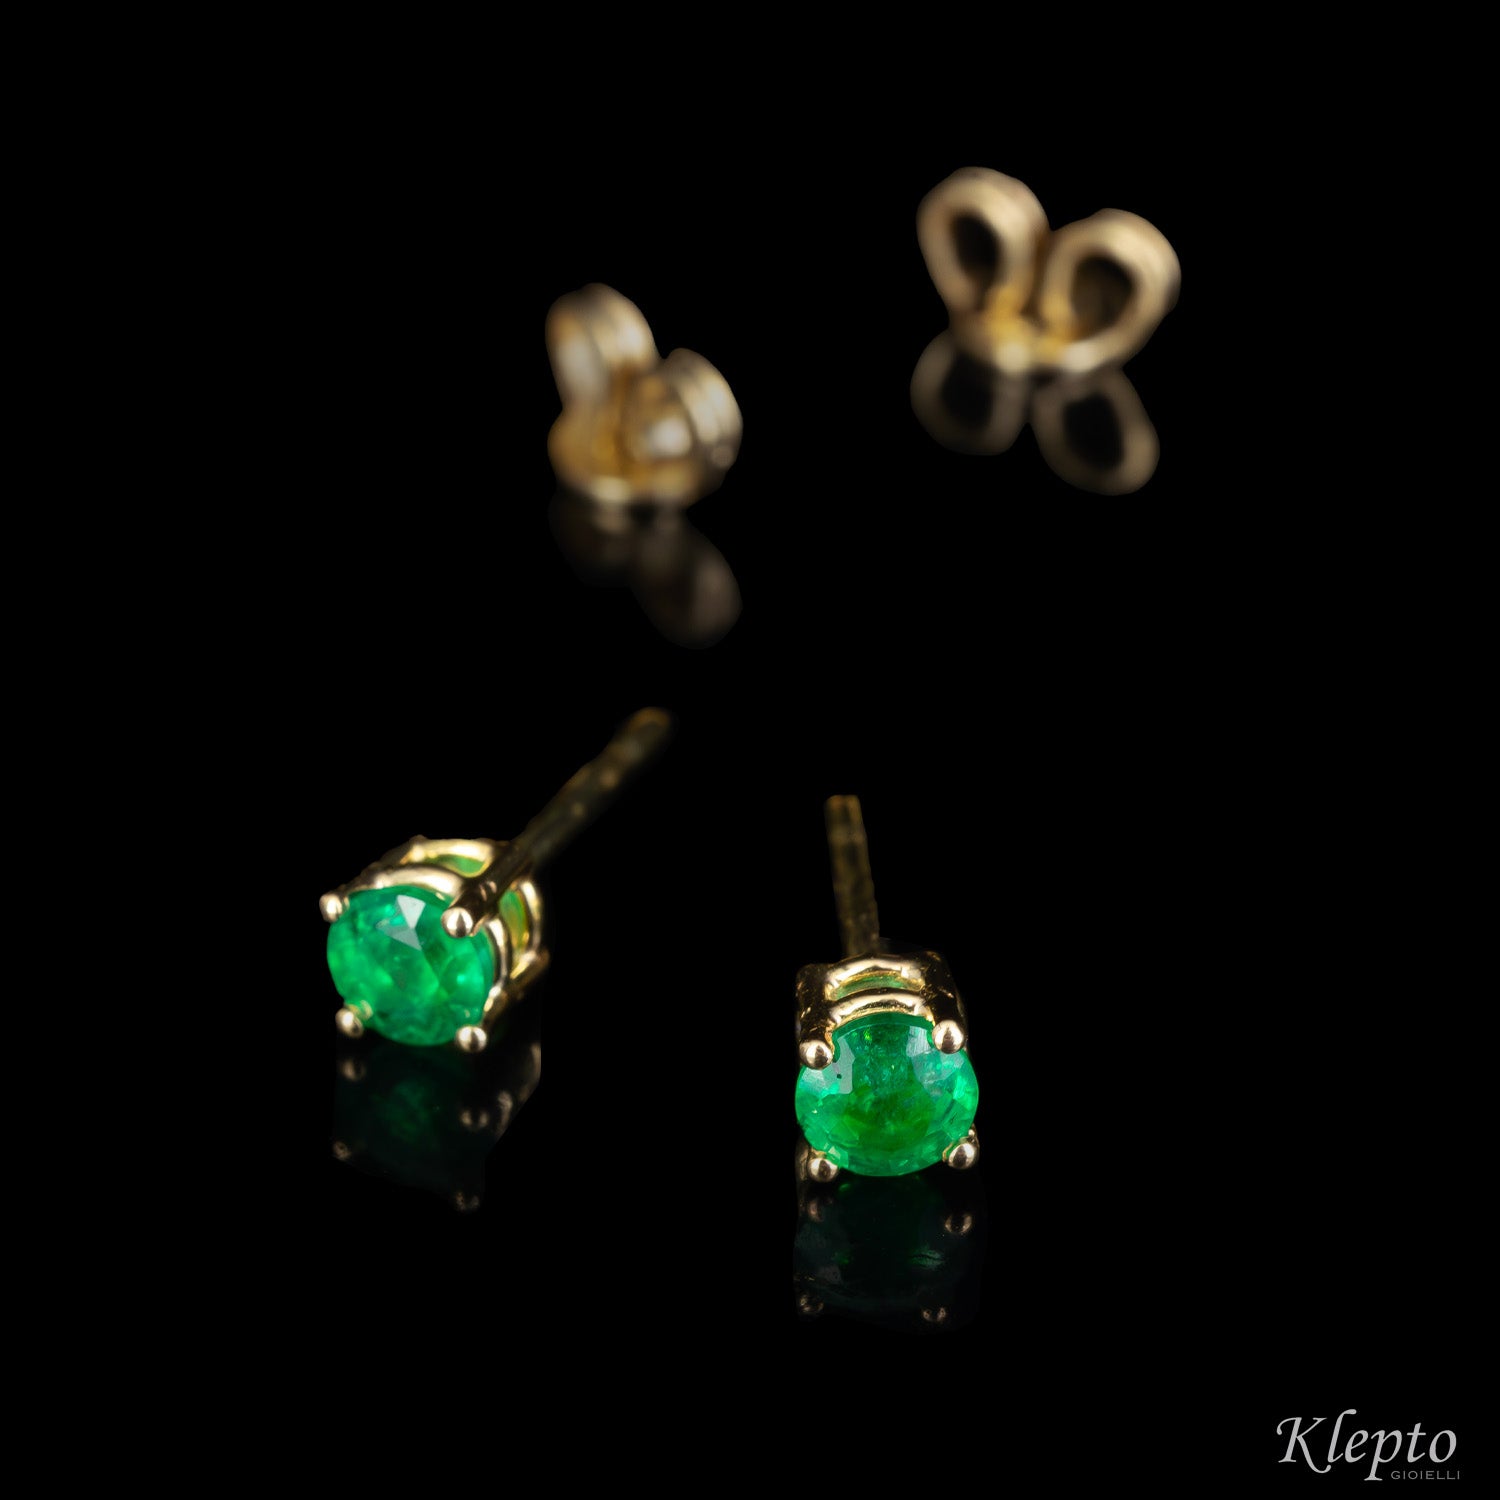 Yellow gold earrings with emeralds